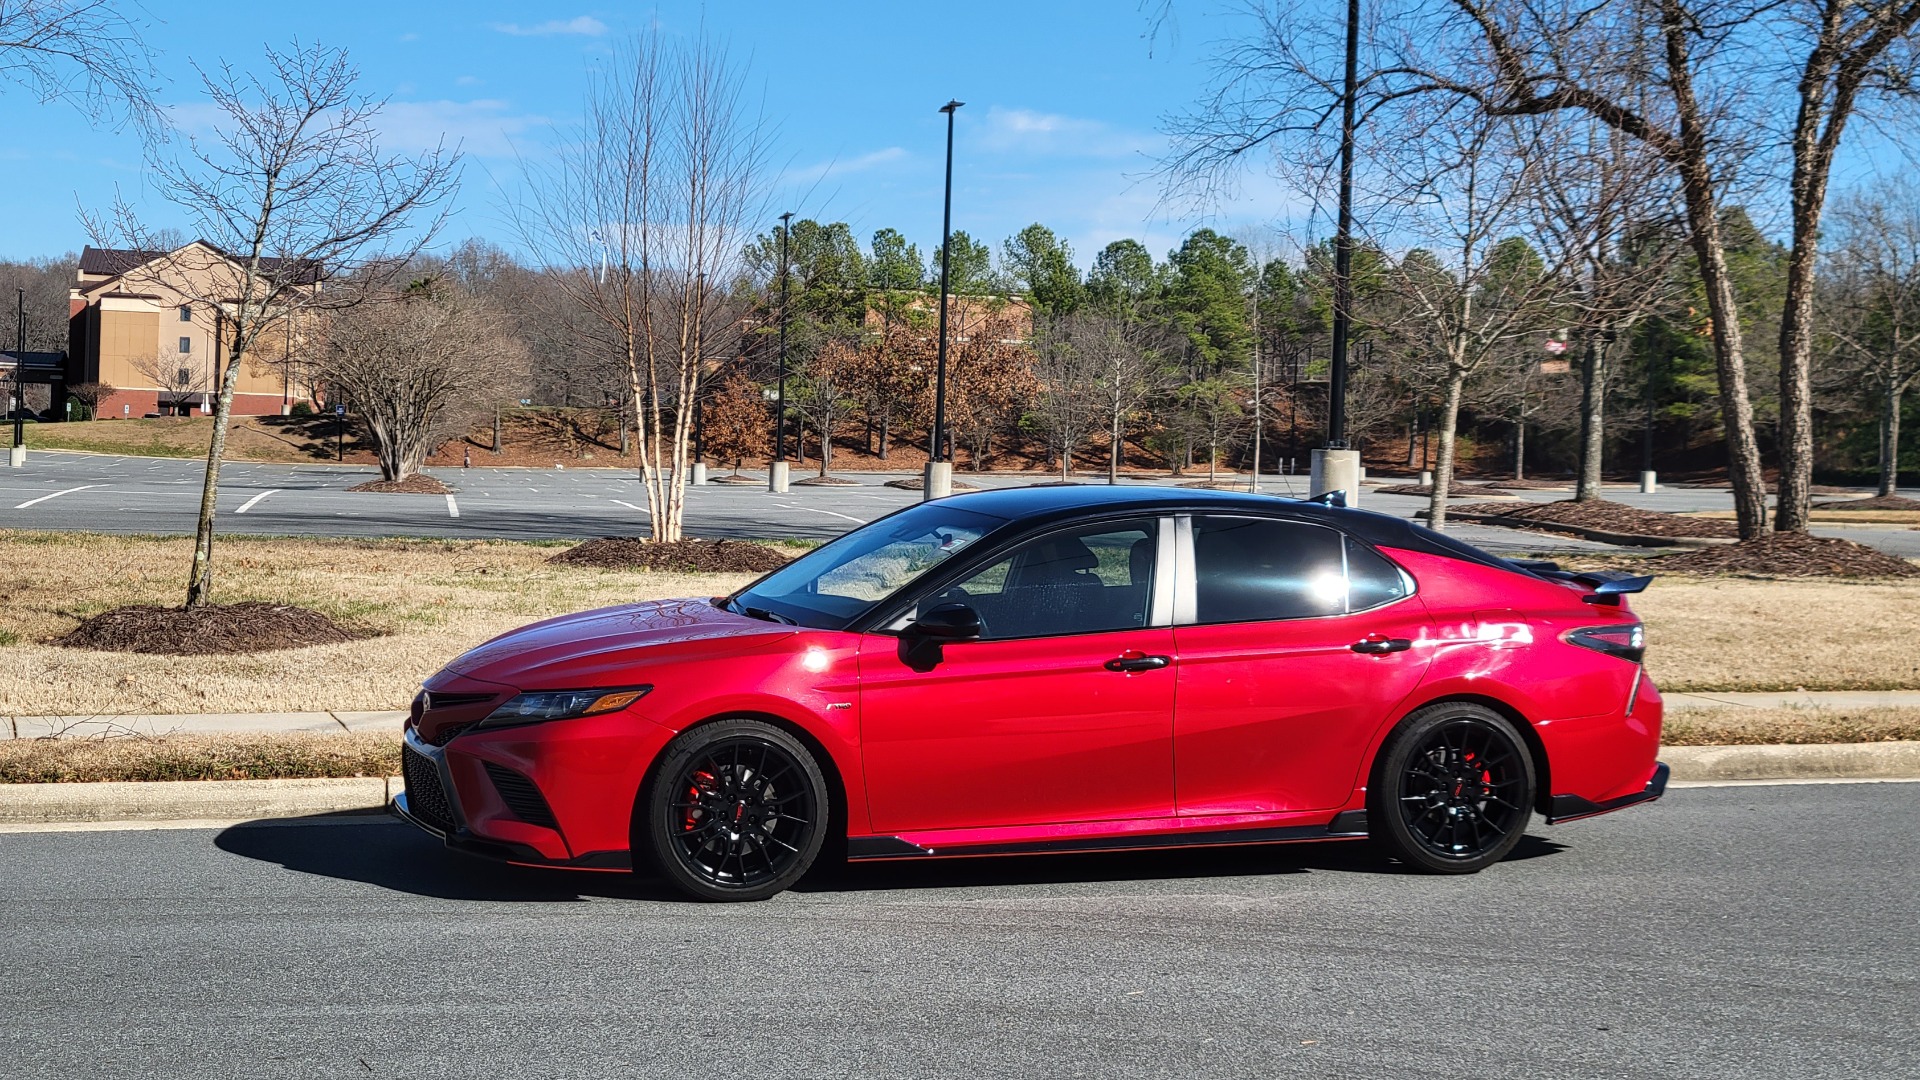 Used 2020 Toyota CAMRY TRD 3.5L V6 SEDAN / 8-SPEED AUTO / CLOTH SEATS / REARVIEW for sale $35,995 at Formula Imports in Charlotte NC 28227 86